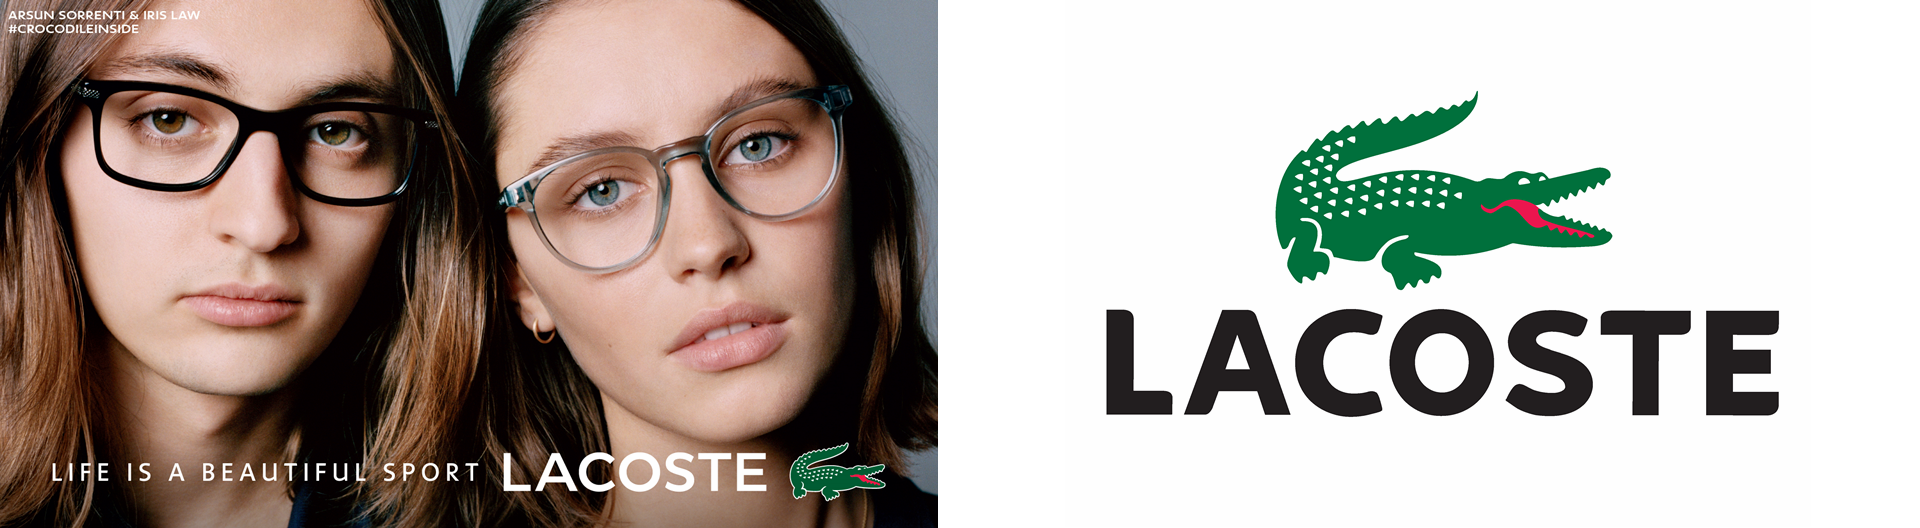 what is a lacoste